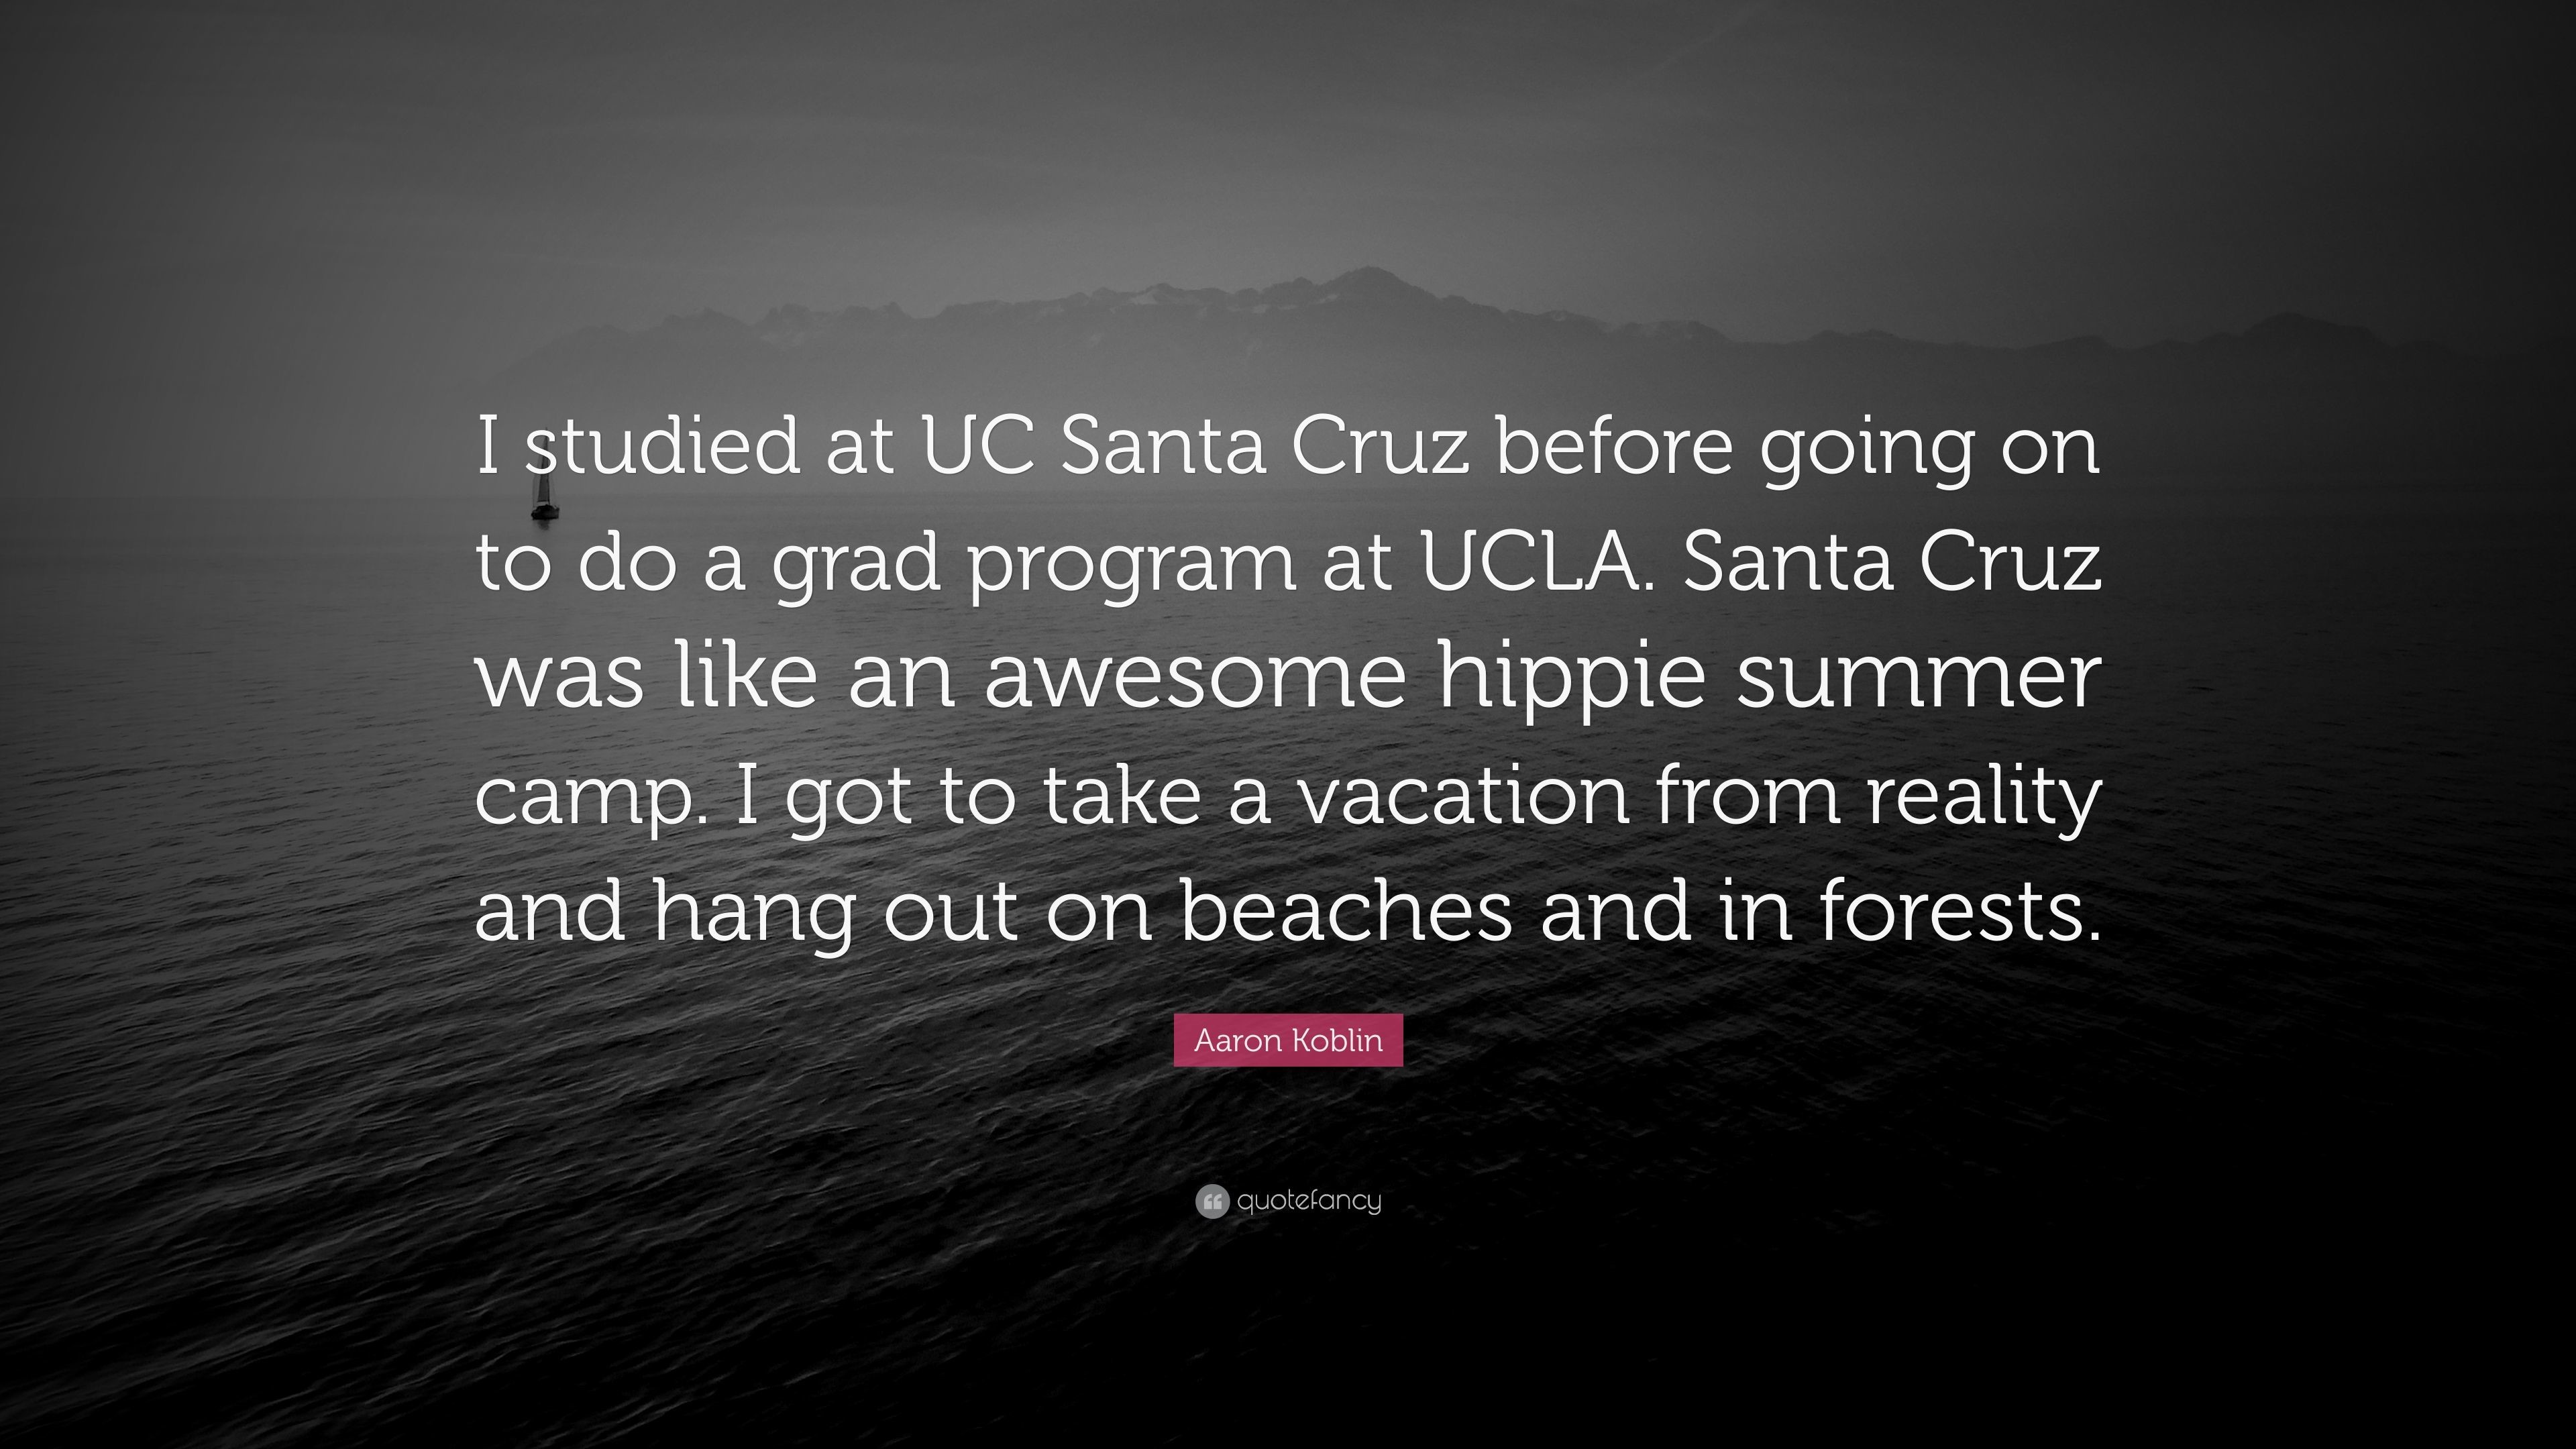 3840x2160 Aaron Koblin Quote: “I studied at UC Santa Cruz before going on to do